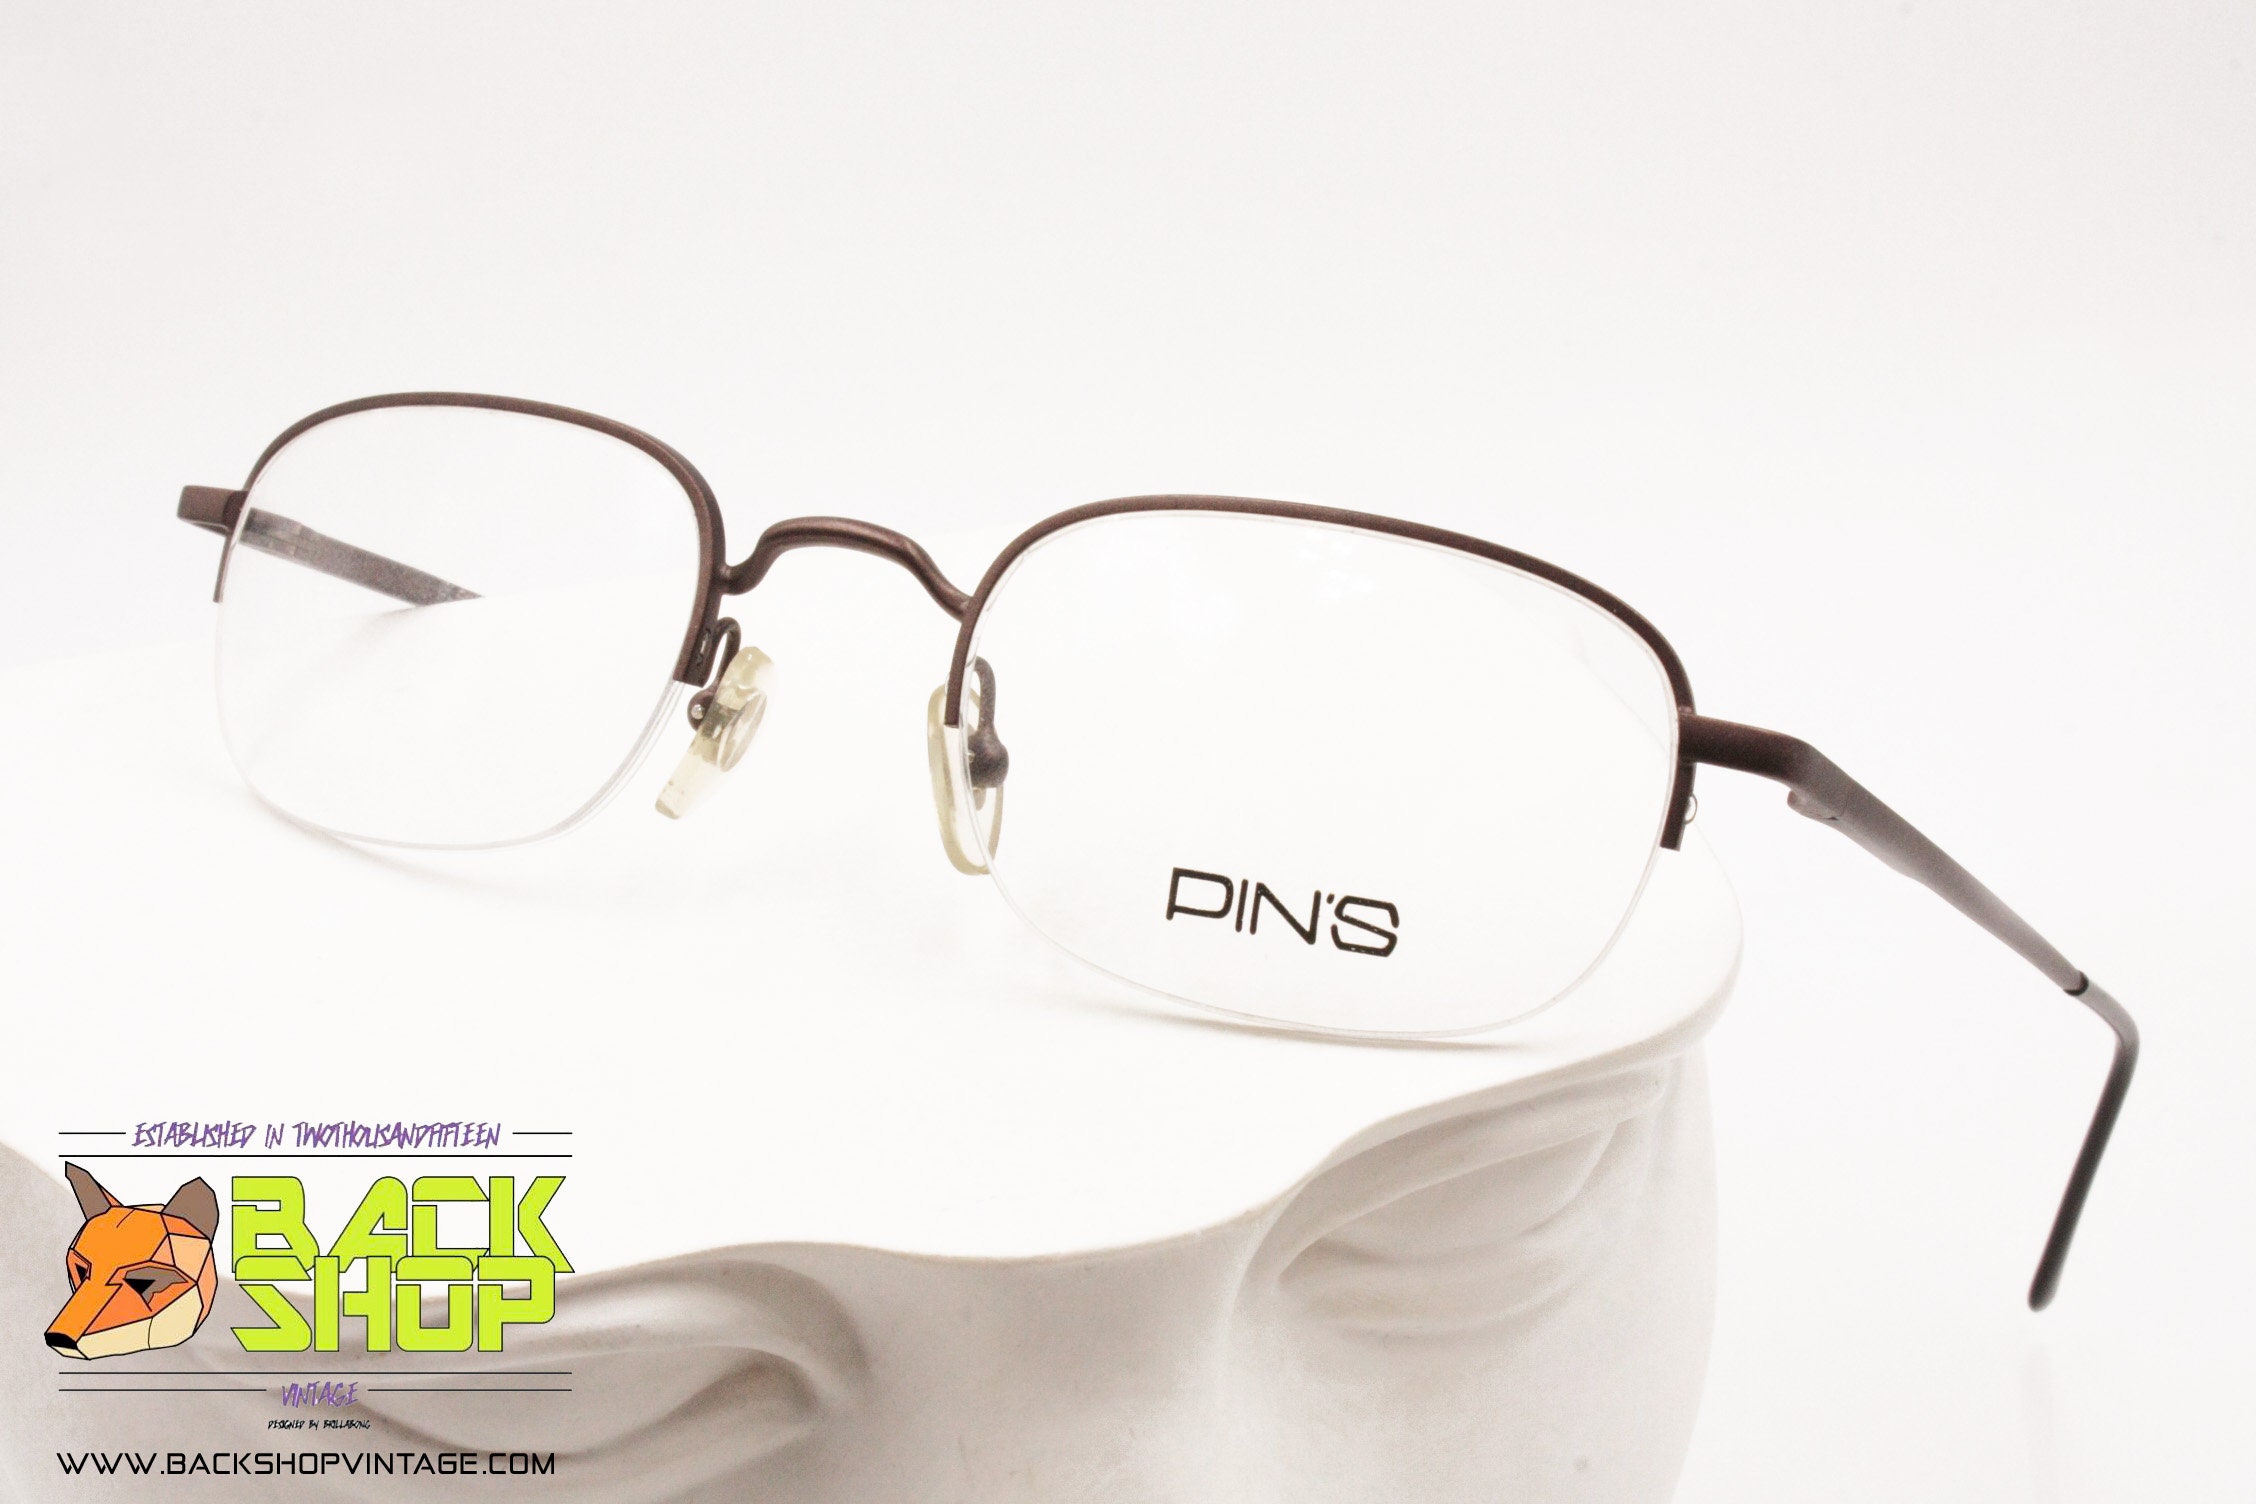 PIN'S Made in Italy Classic Optical Frame Glasses Half - Etsy